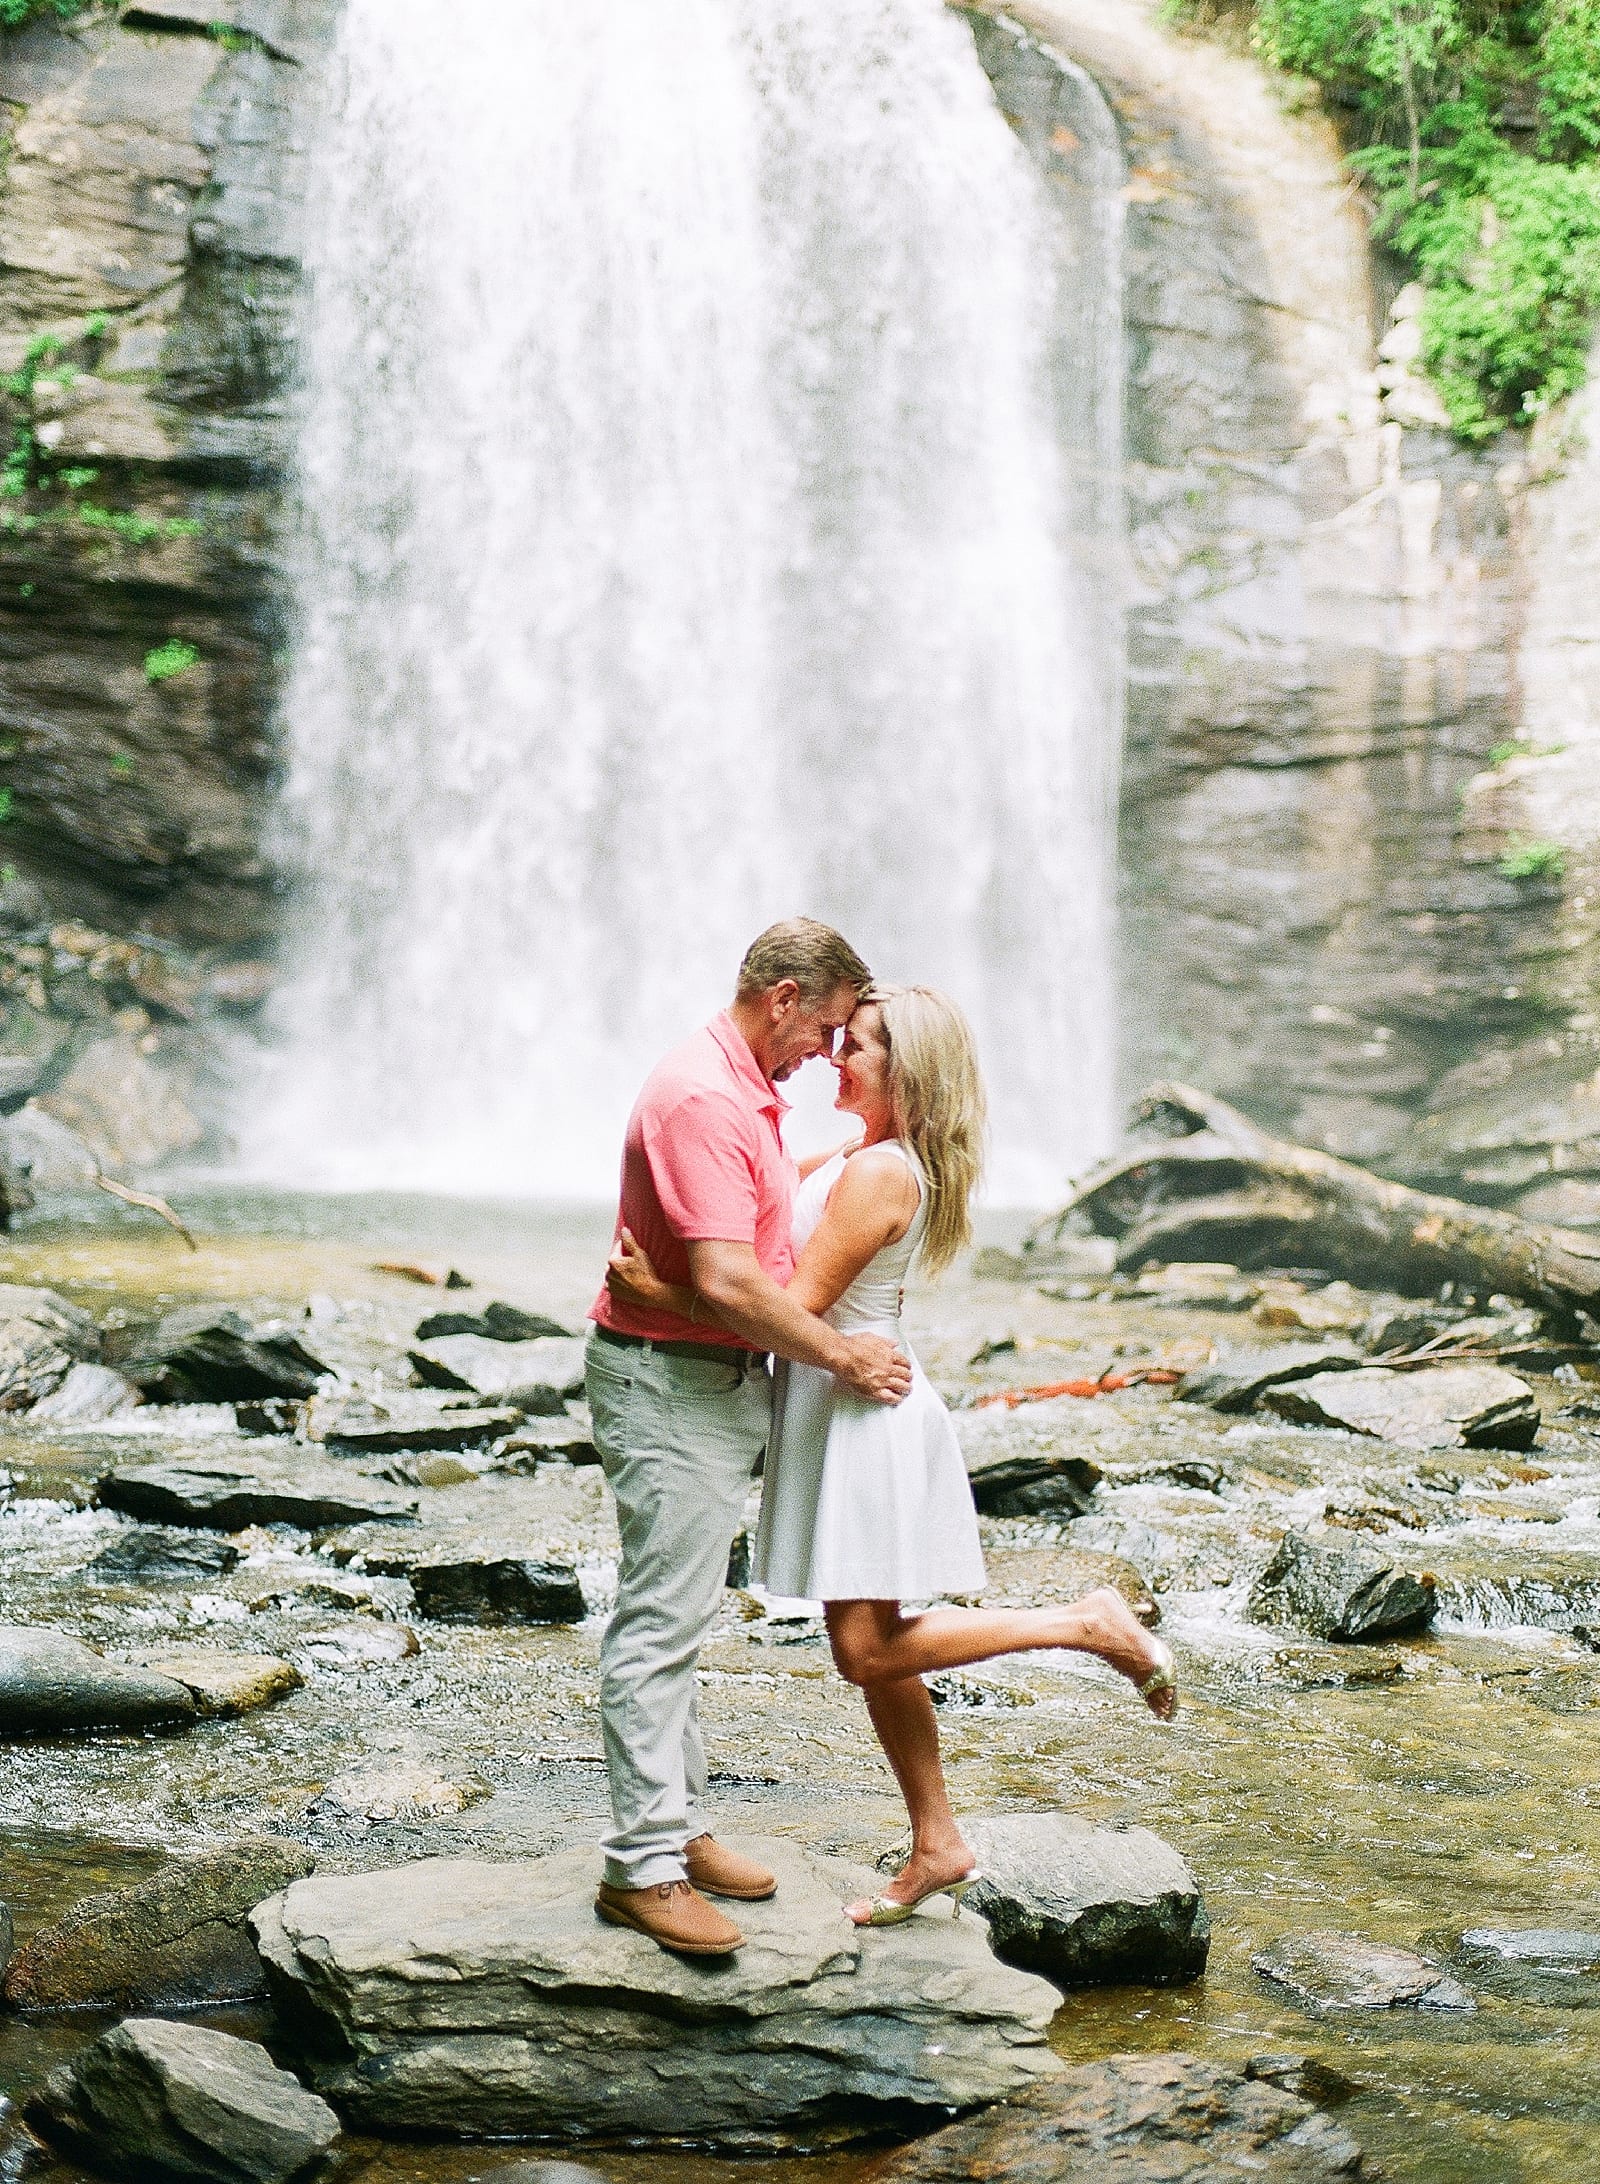 Looking Glass Falls NC Couple in River on Rock Photo